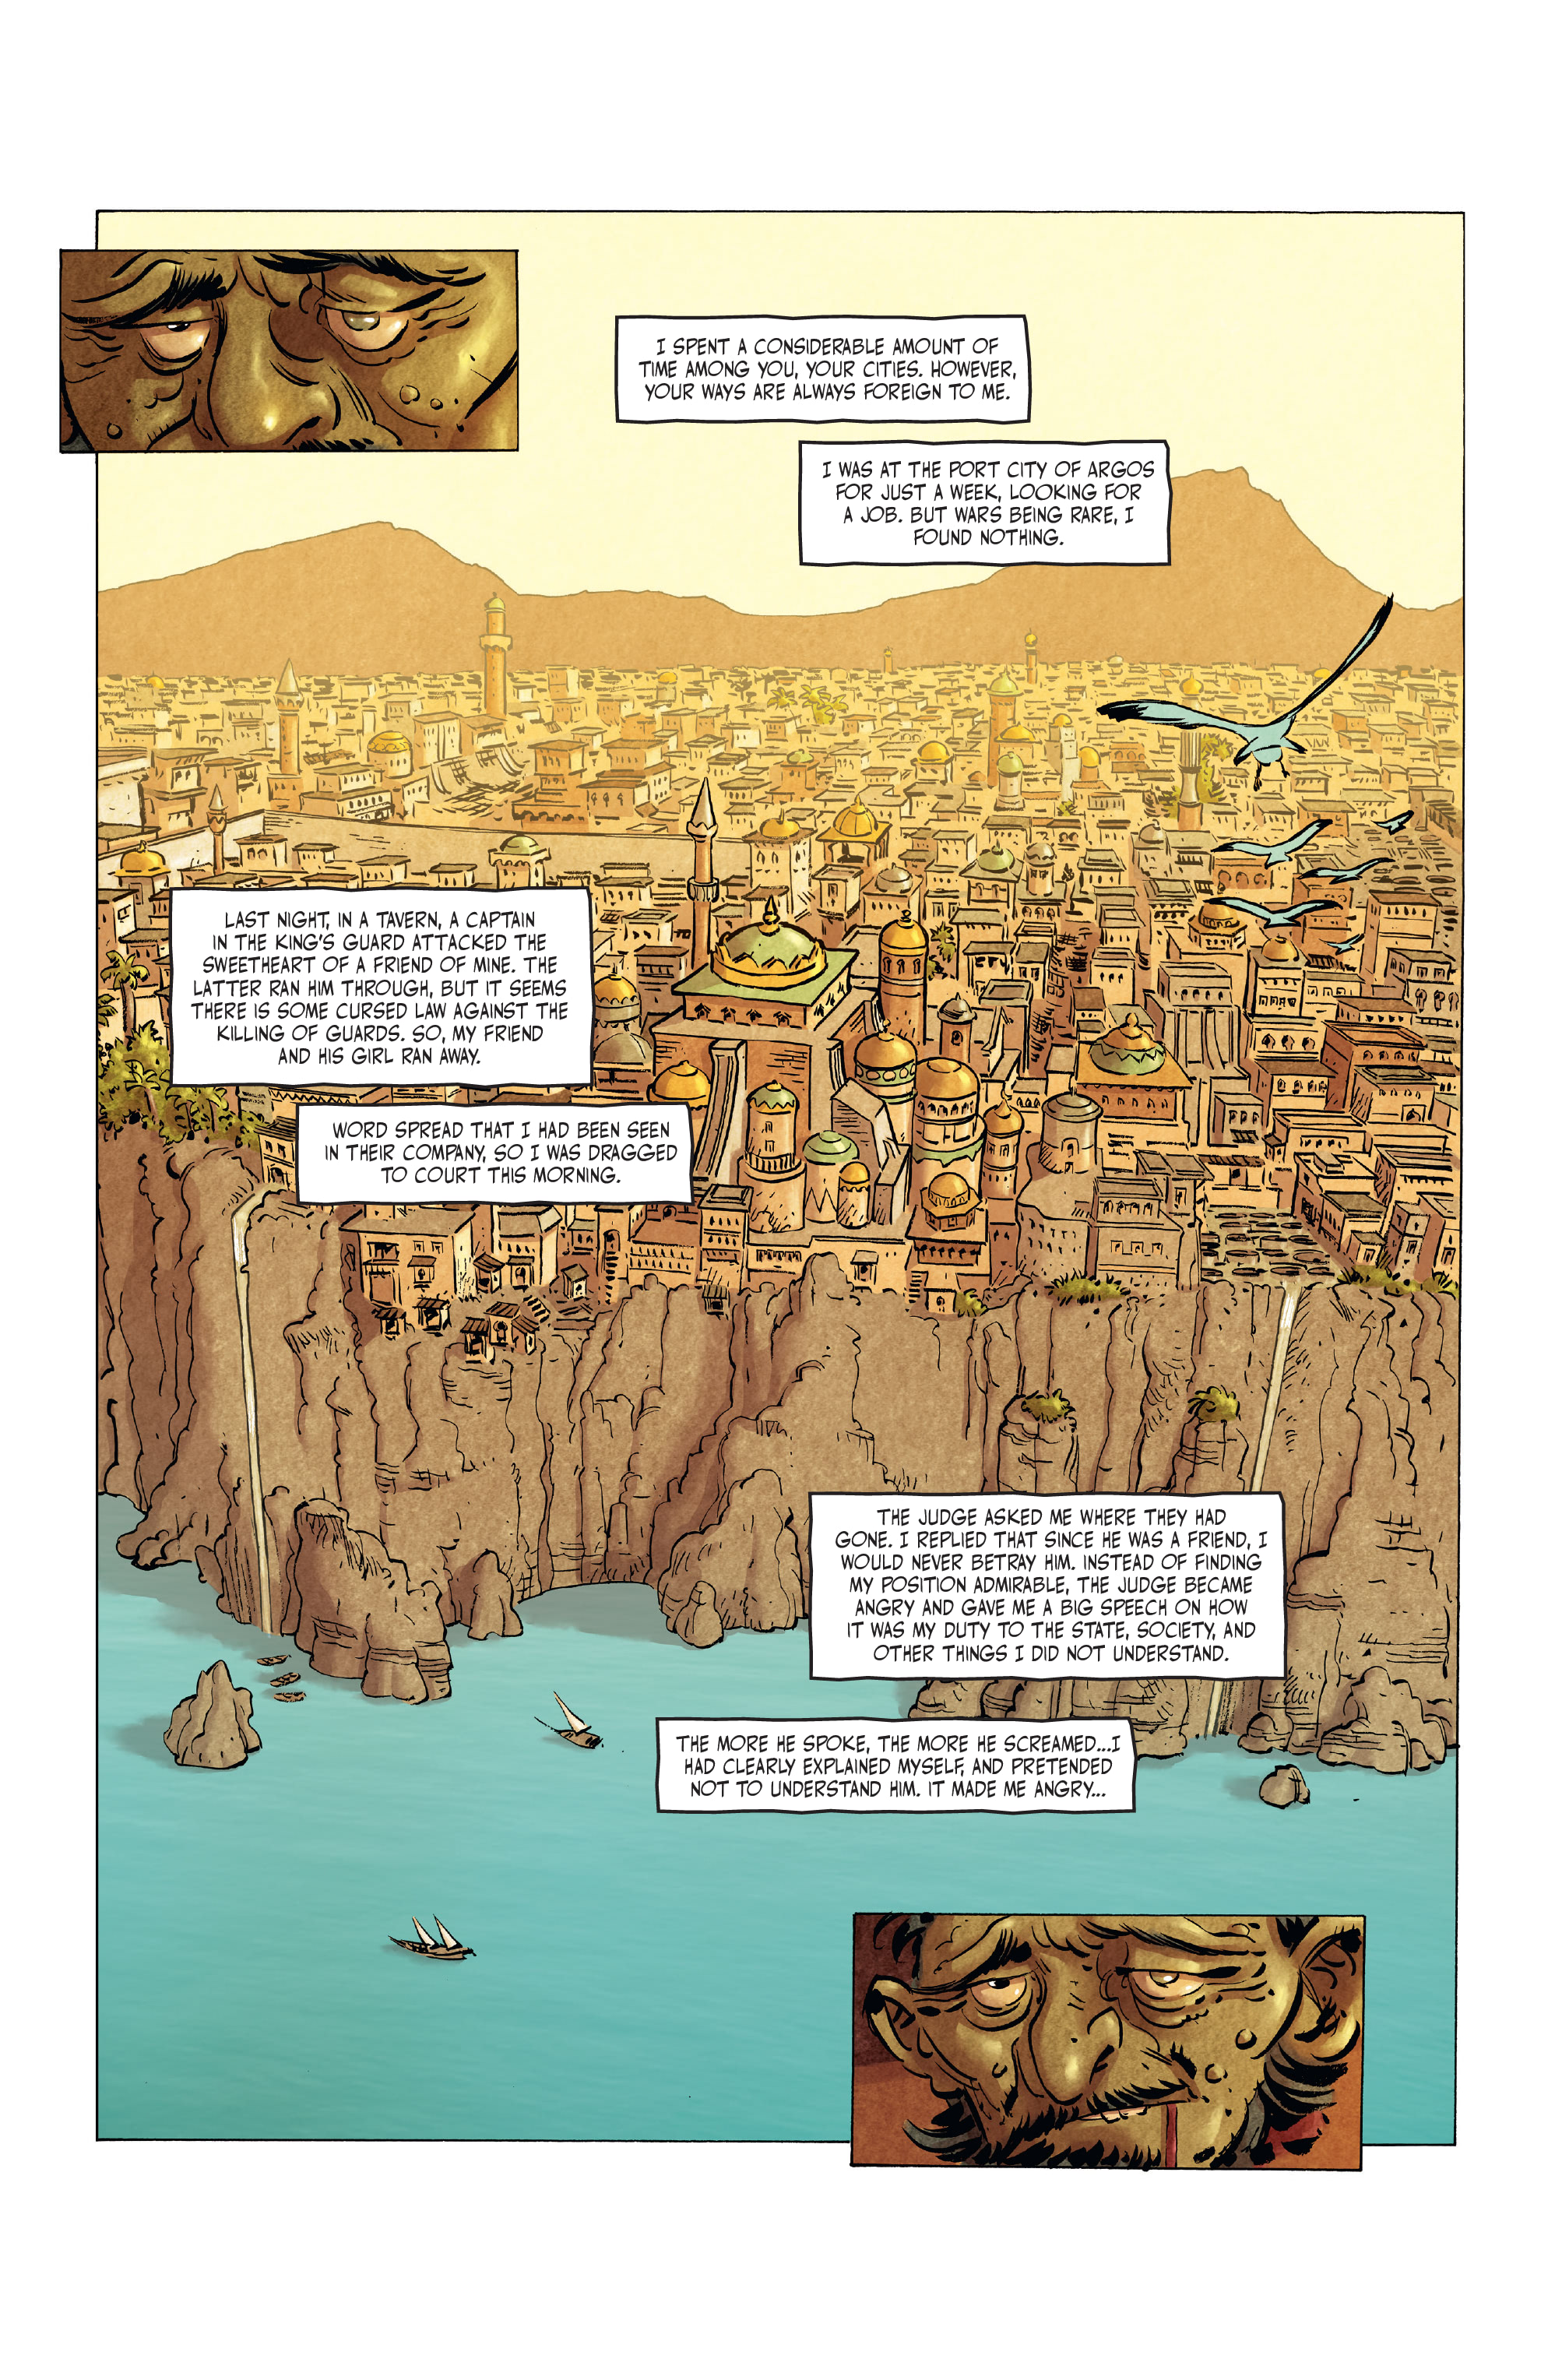 The Cimmerian: Queen of the Black Coast (2020-): Chapter 1 - Page 3